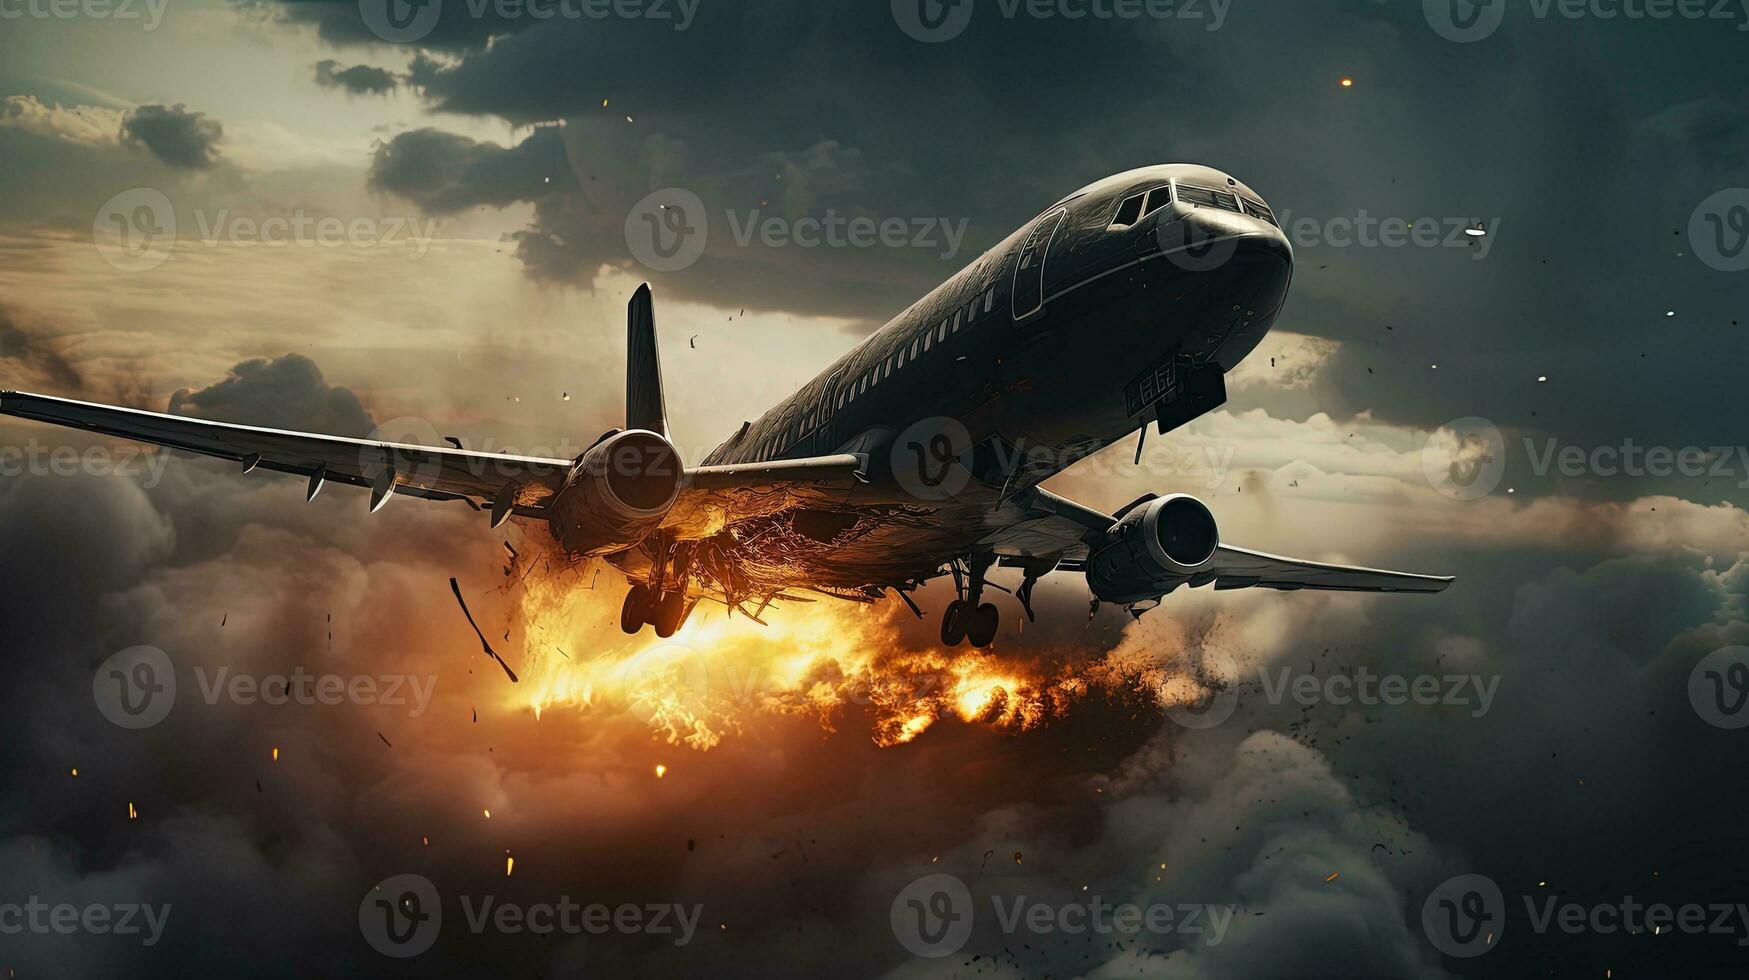 Dangerous situation leads to plane crash in the air. silhouette concept photo